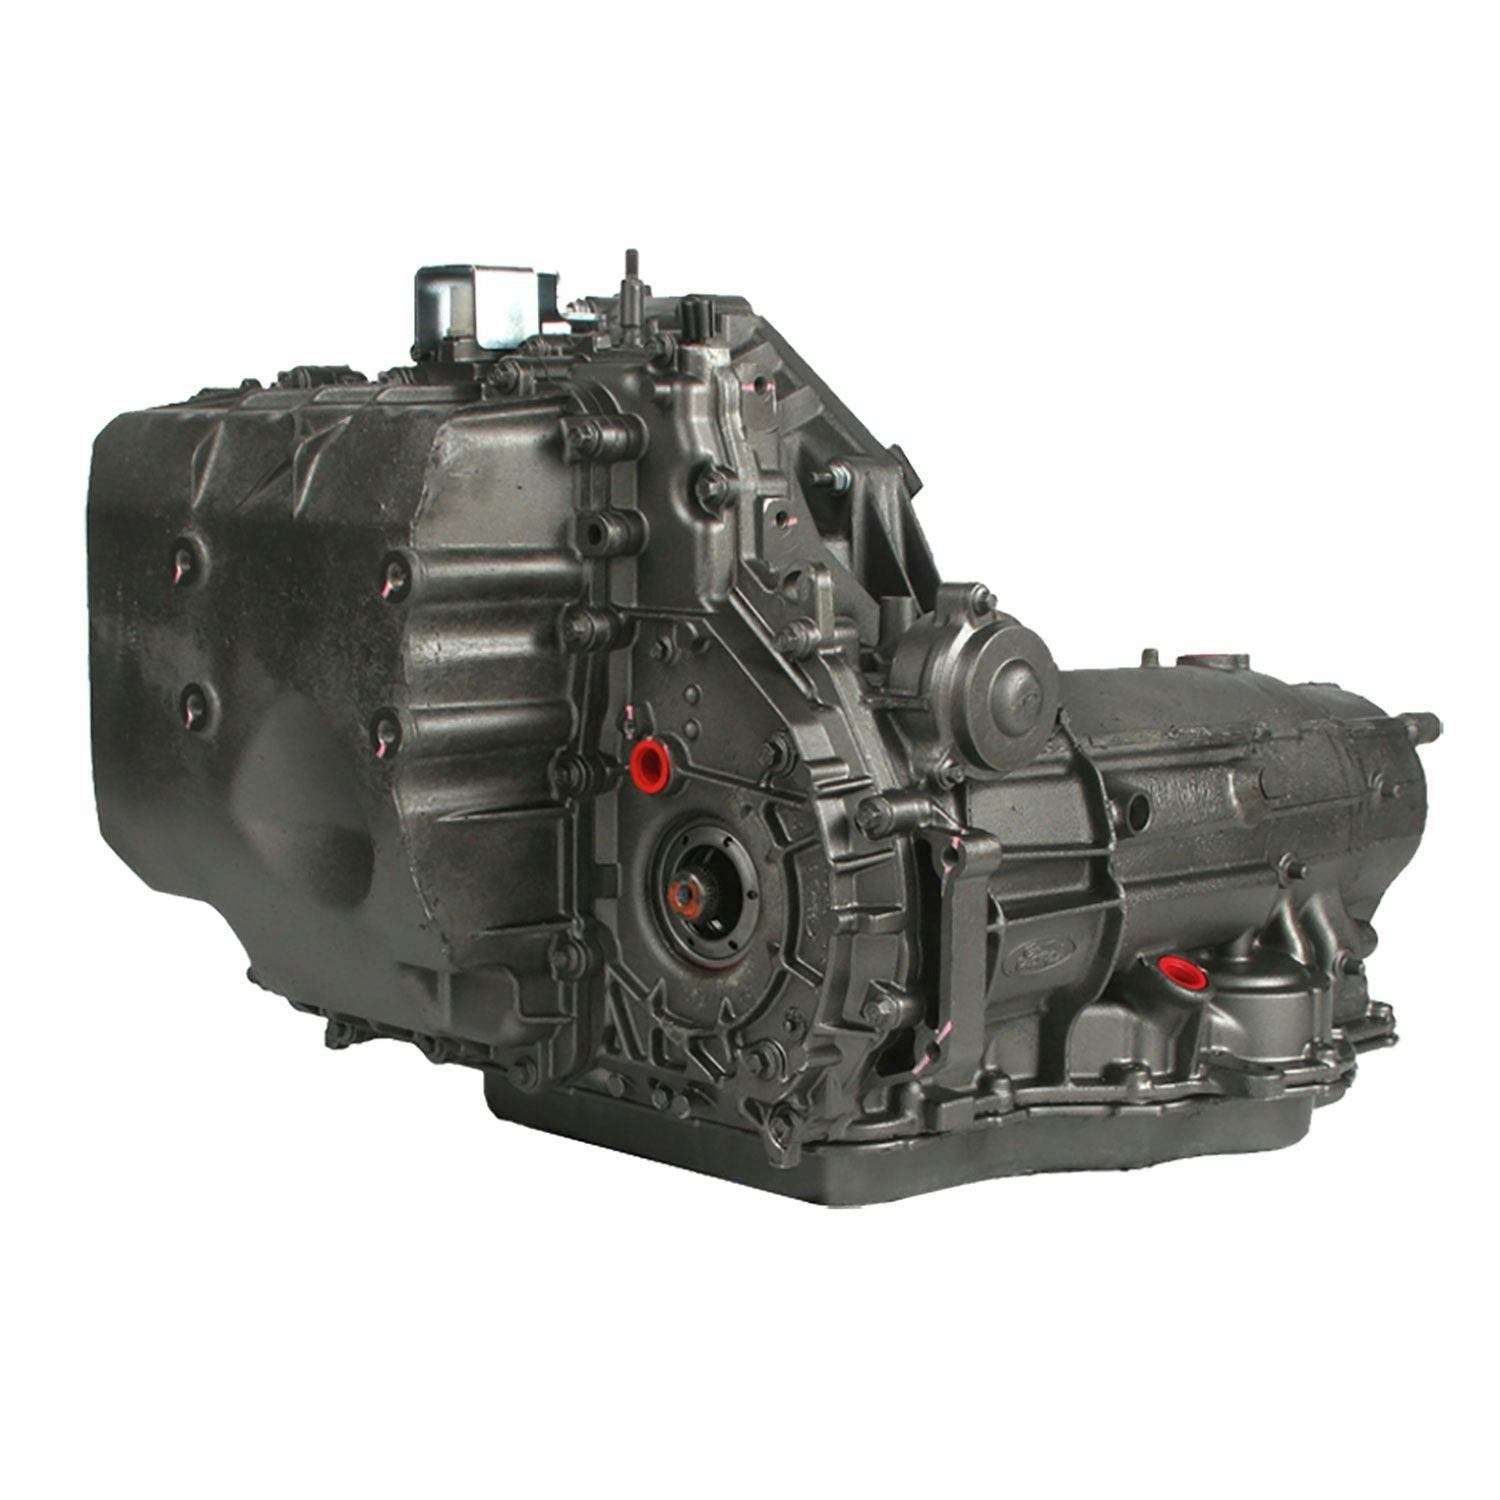 Automatic Transmission for 1996-1997 Lincoln Continental FWD with 4.6L V8 Engine